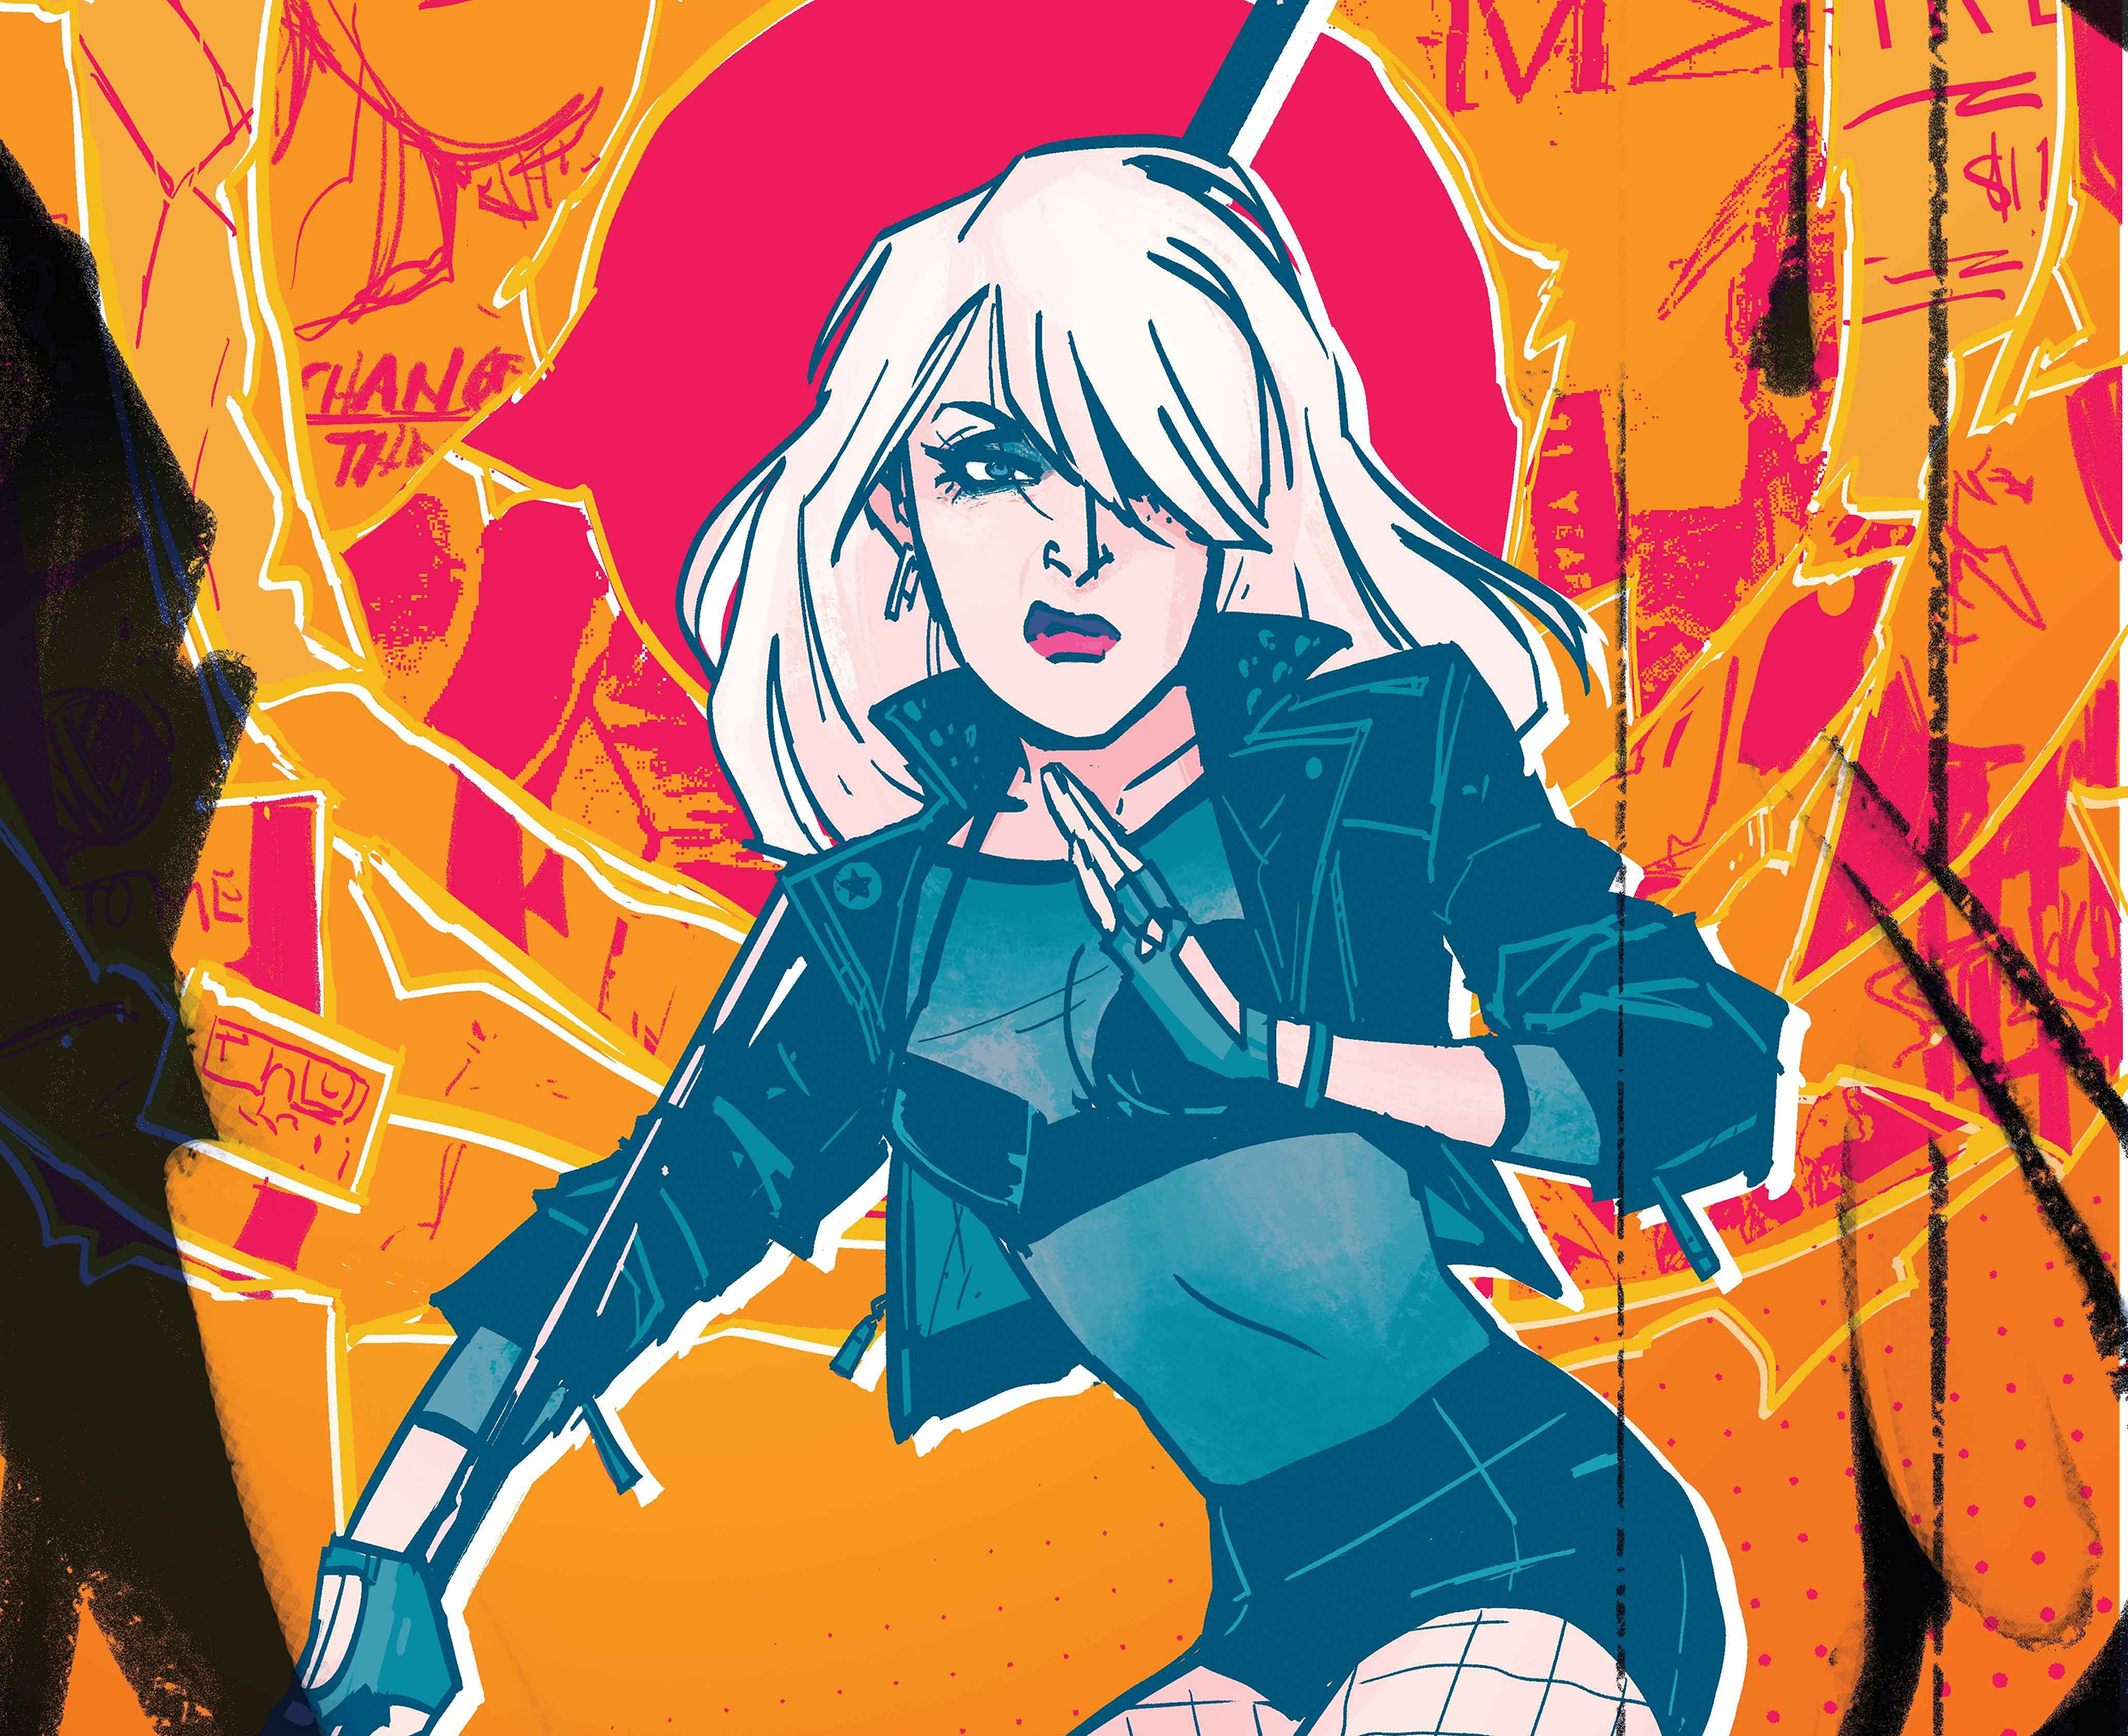 Free download wallpaper Comics, Black Canary on your PC desktop